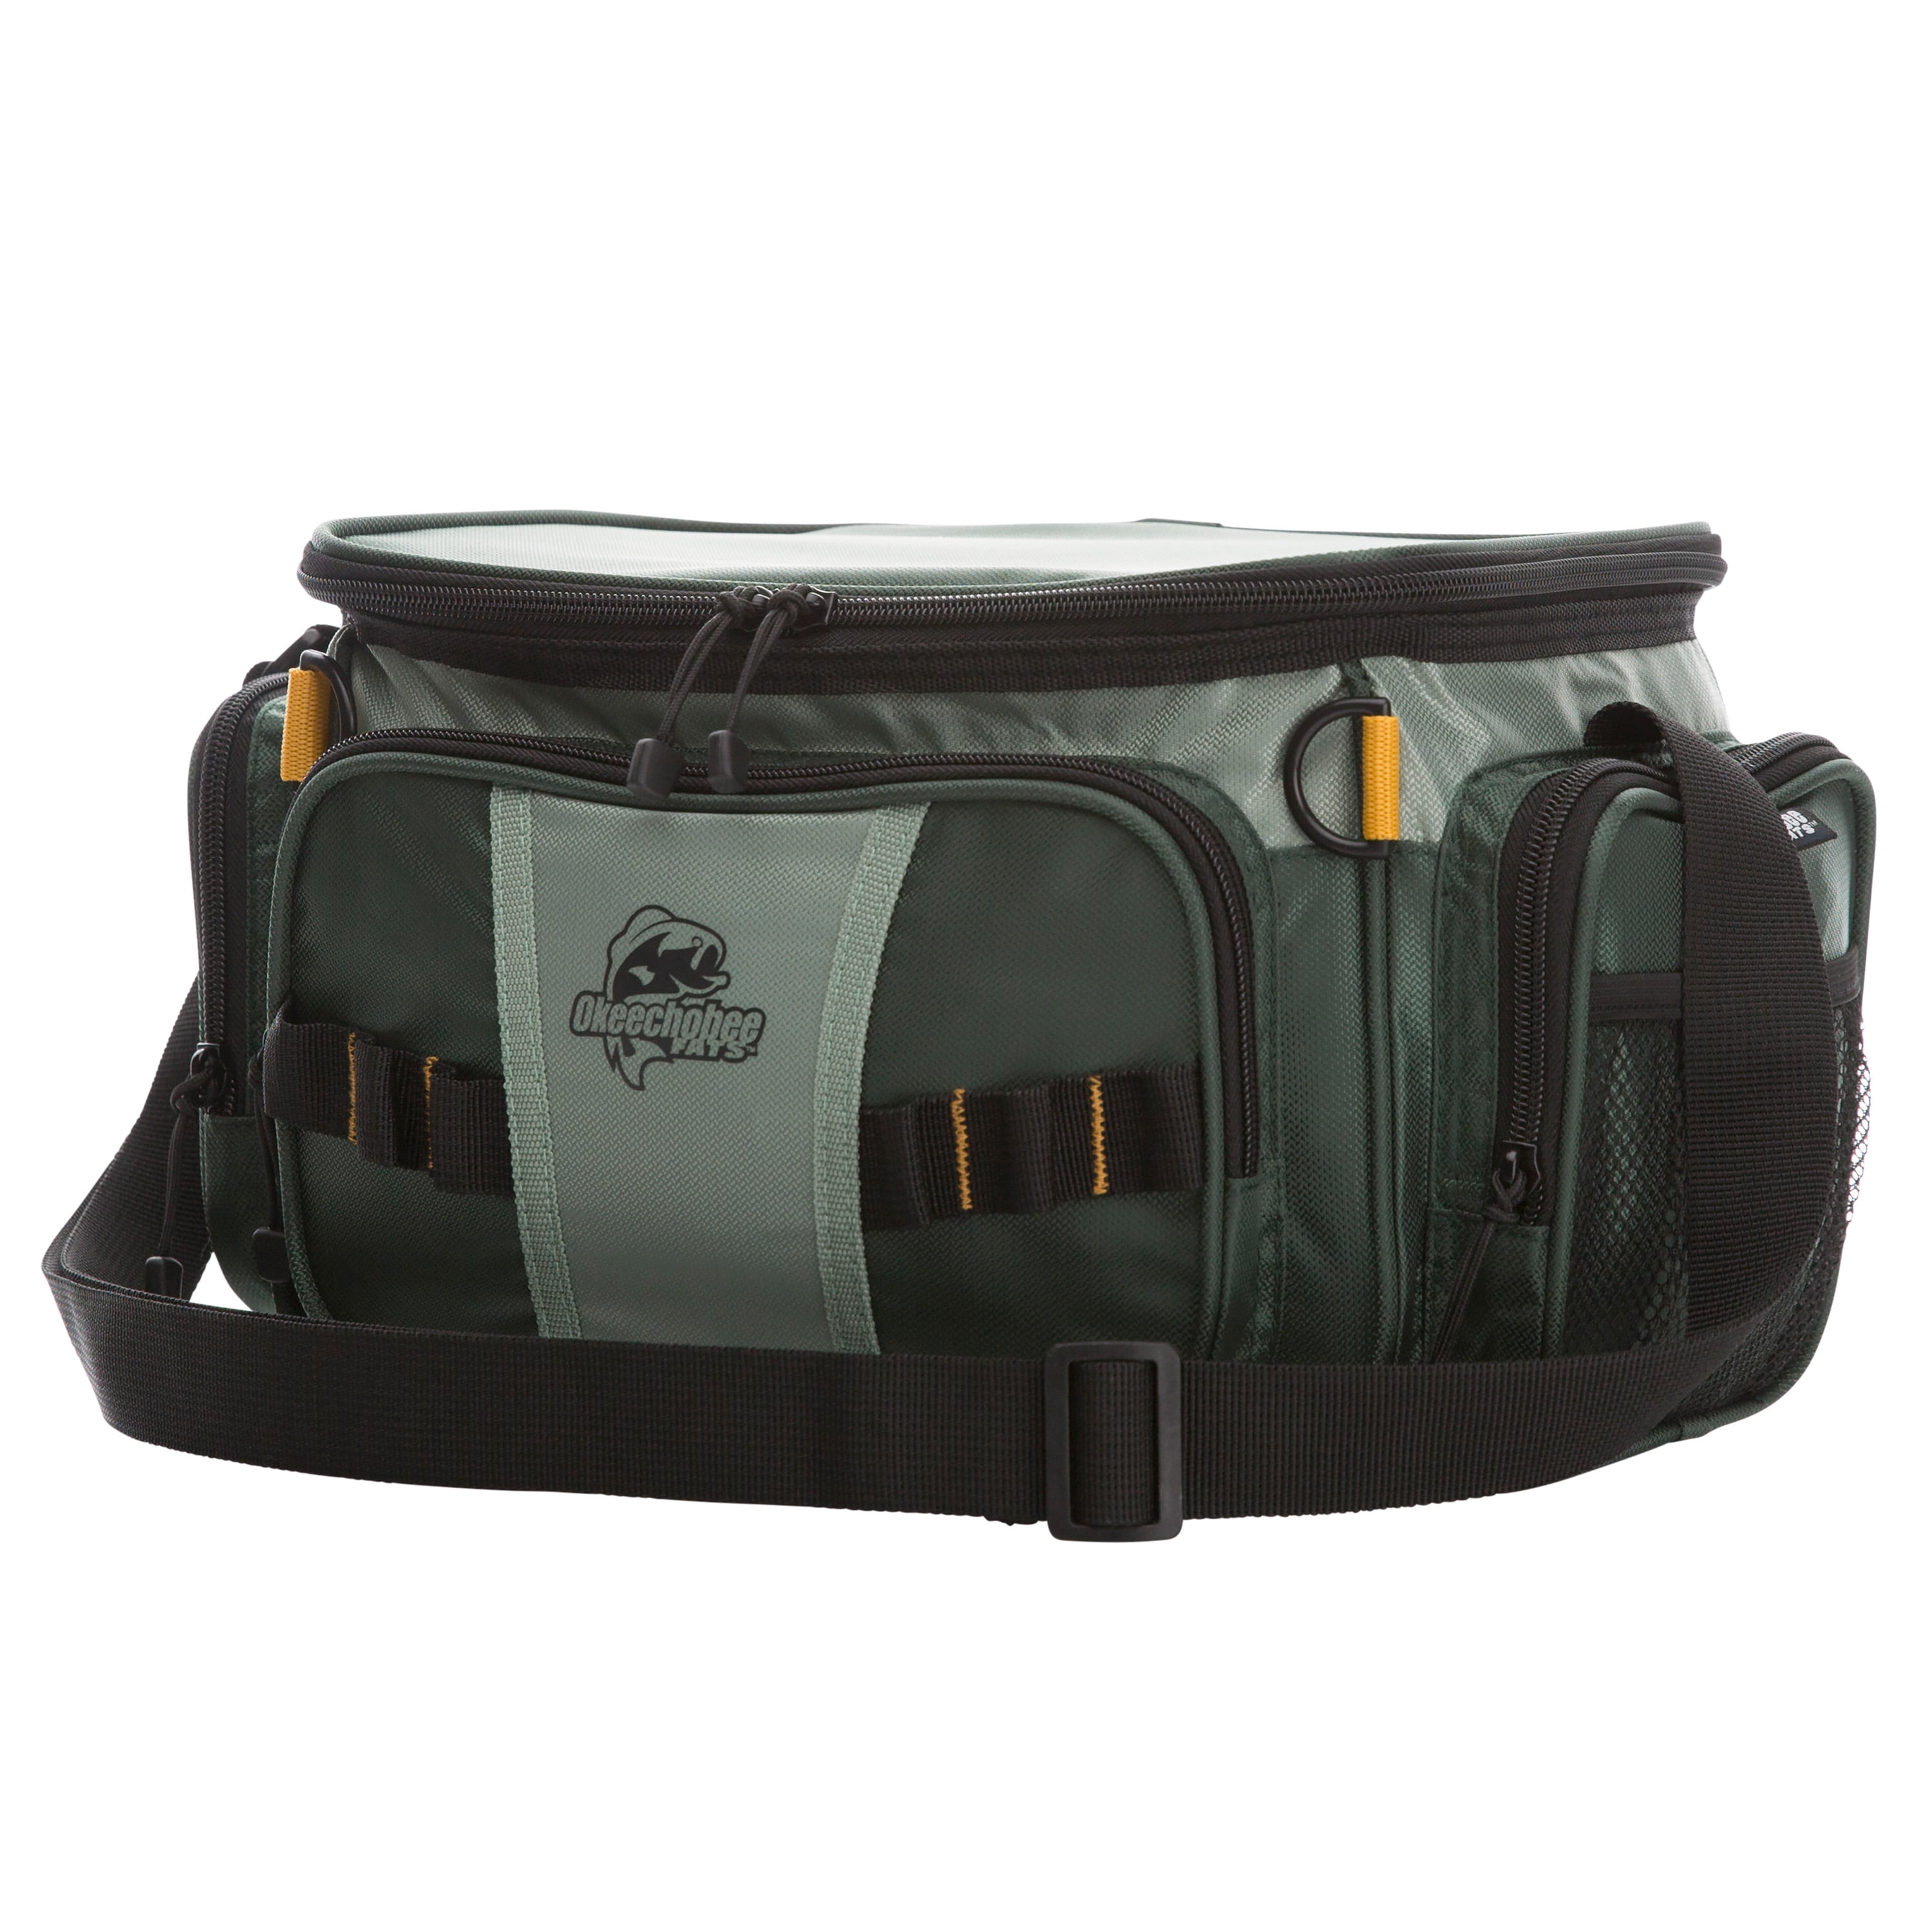 Okeechobee Fats Small Soft-Sided Fishing Tackle Bag with 2 Med